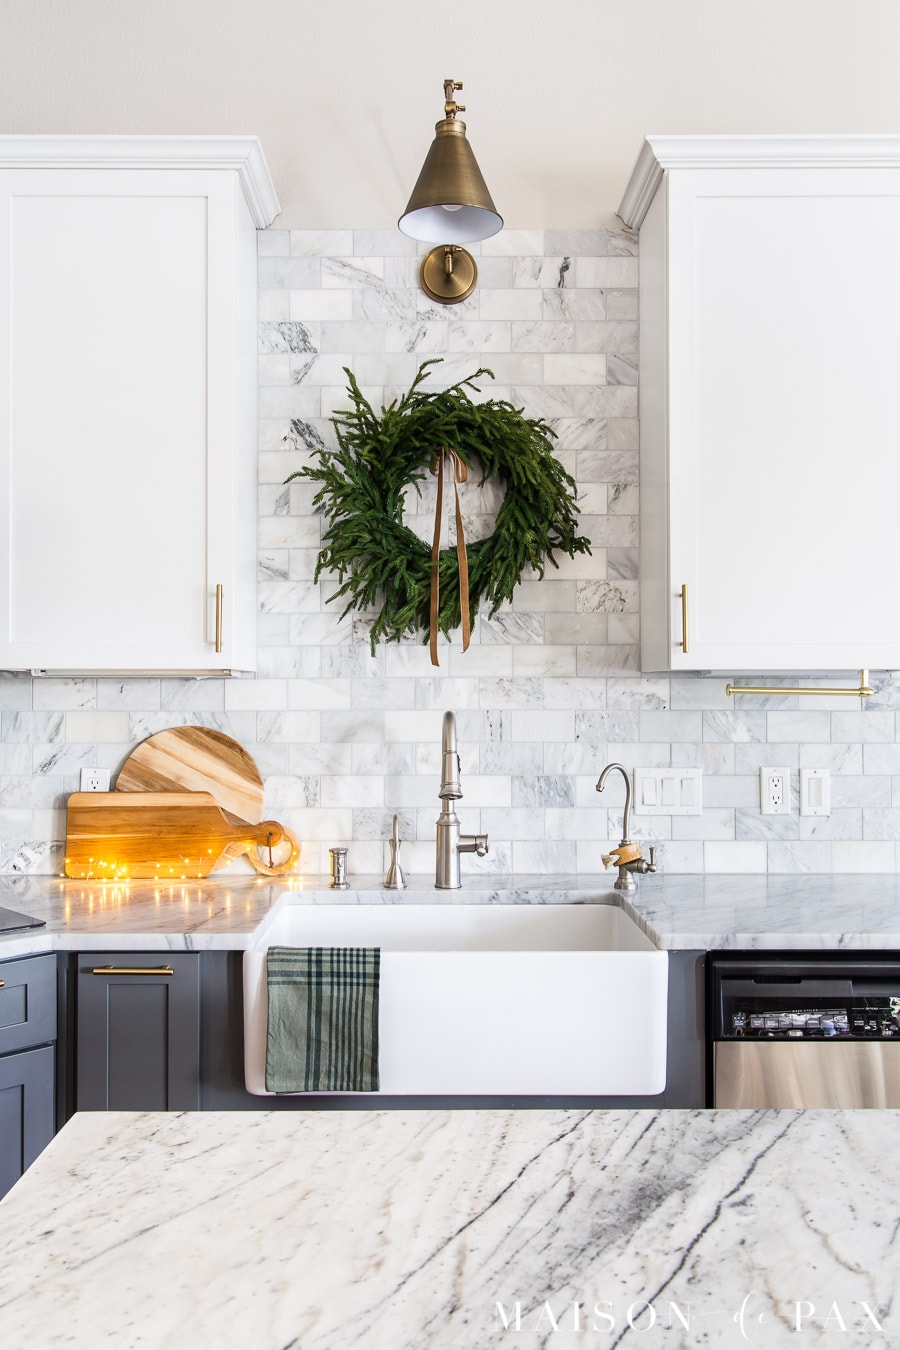 wreath above sink and copper fairy lights on kitchen counter for holiday decor